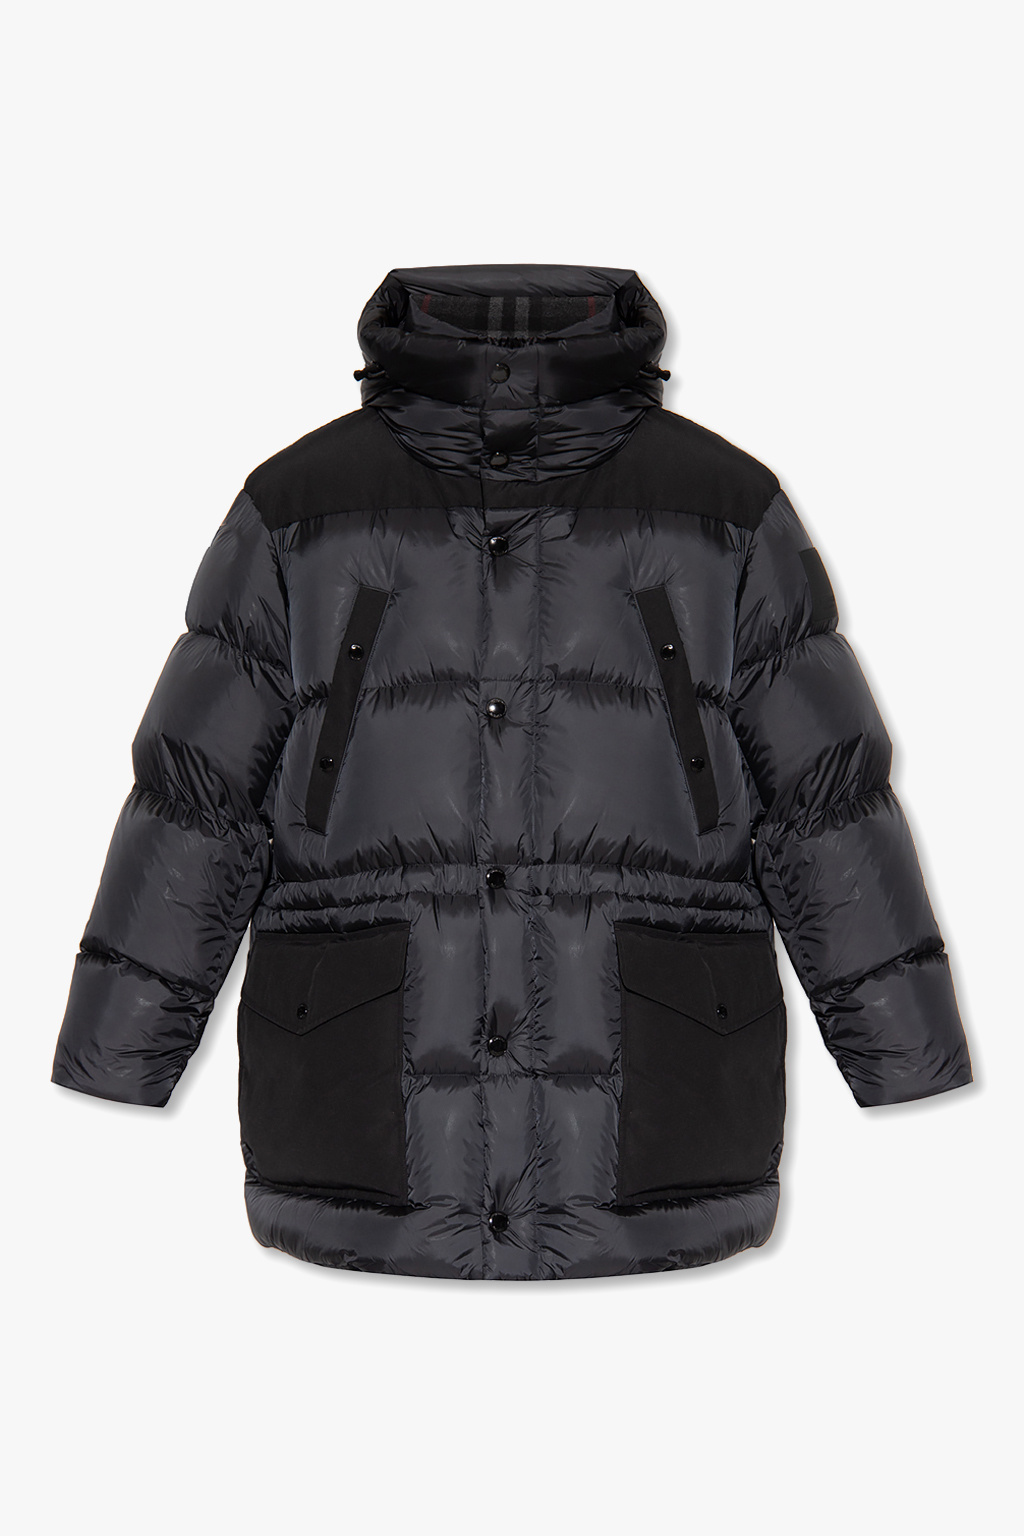 Burberry 'Lindford’ puffer jacket